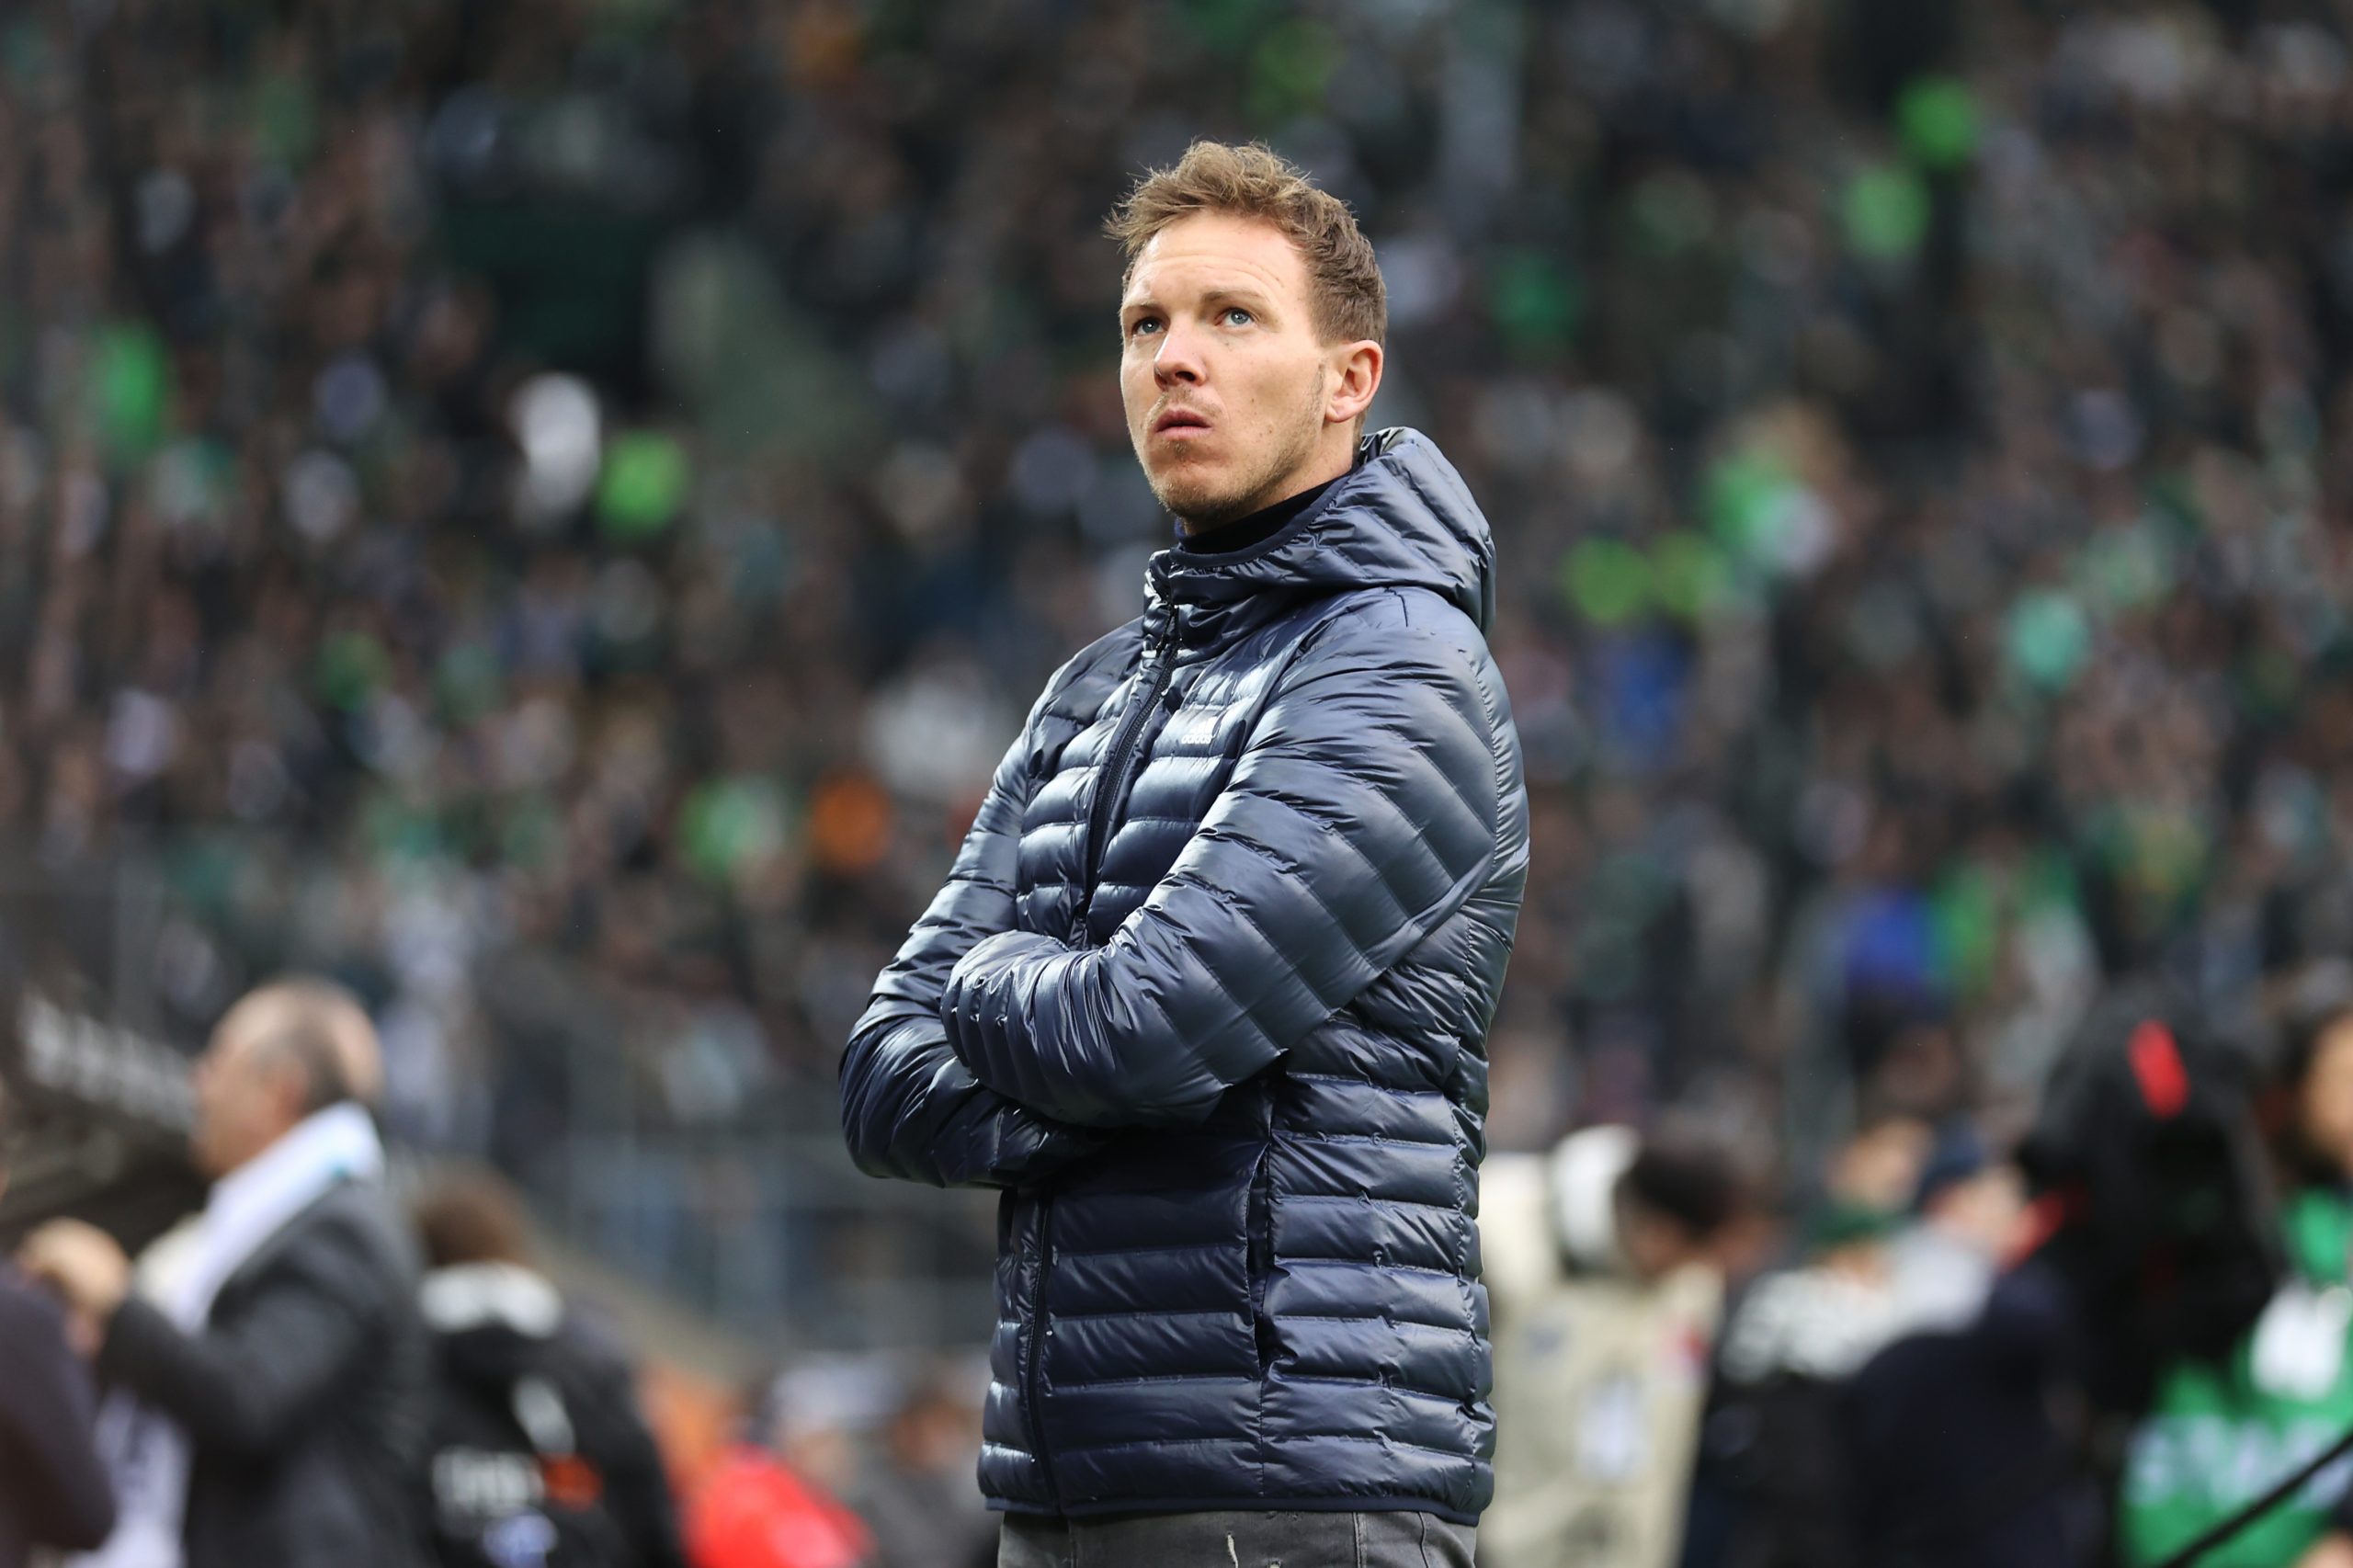 Bayern Munich RELEASE Julian Nagelsmann months after sacking him as he’s set for Germany job on two conditions